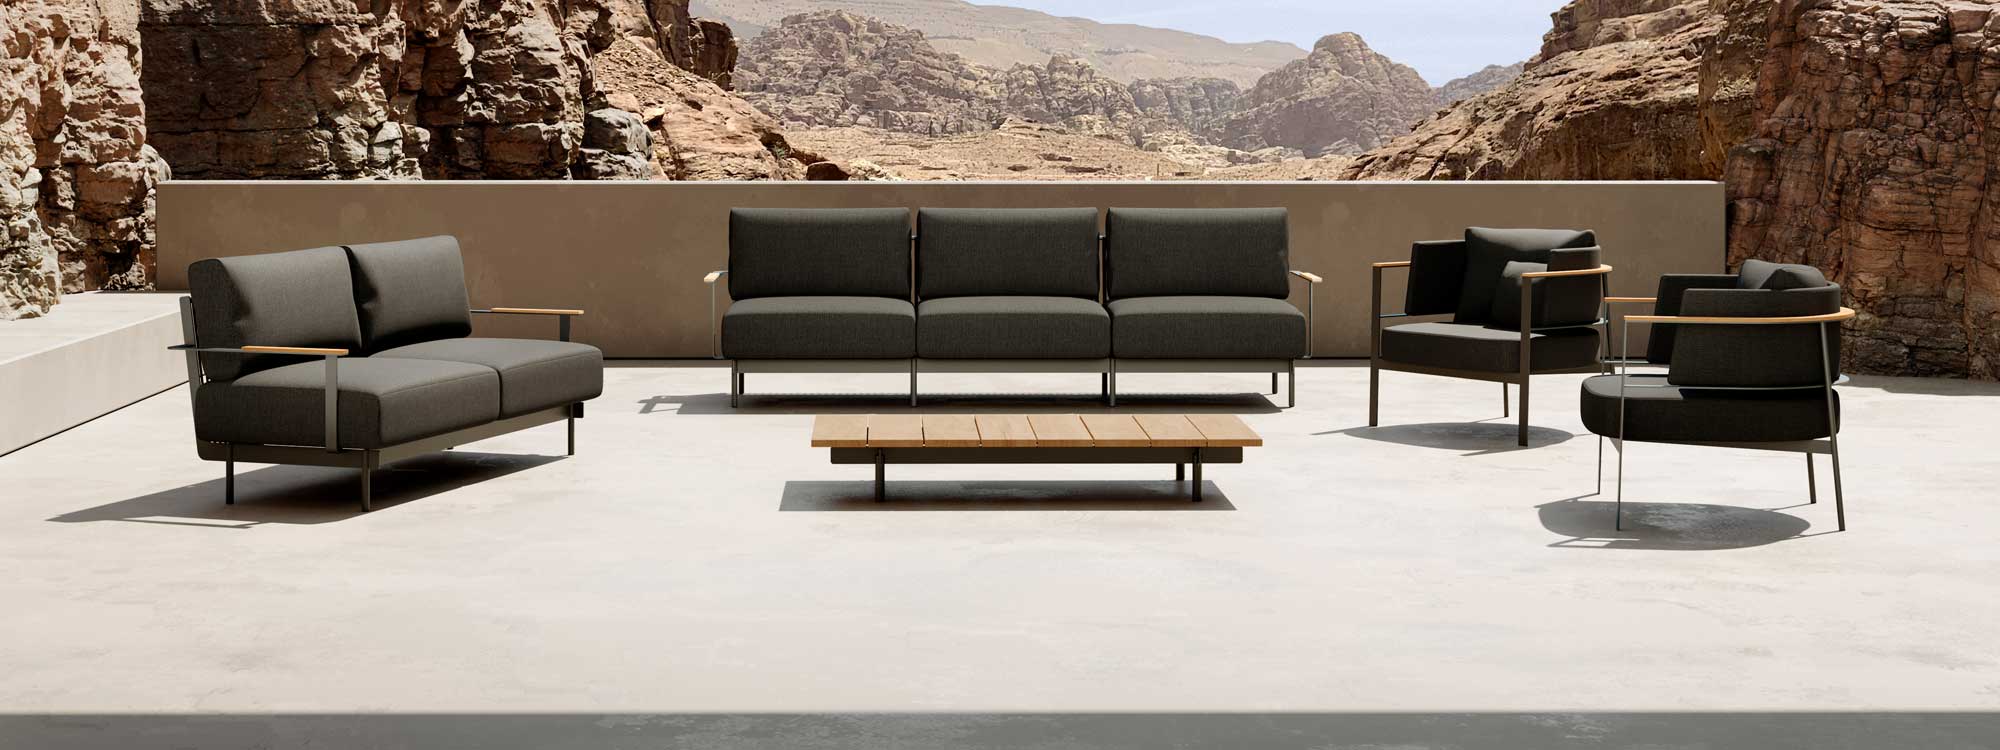 Image of Oisde Penda minimalist garden sofas and lounge chairs on sunny terrace, with arid hilly terrain in the background